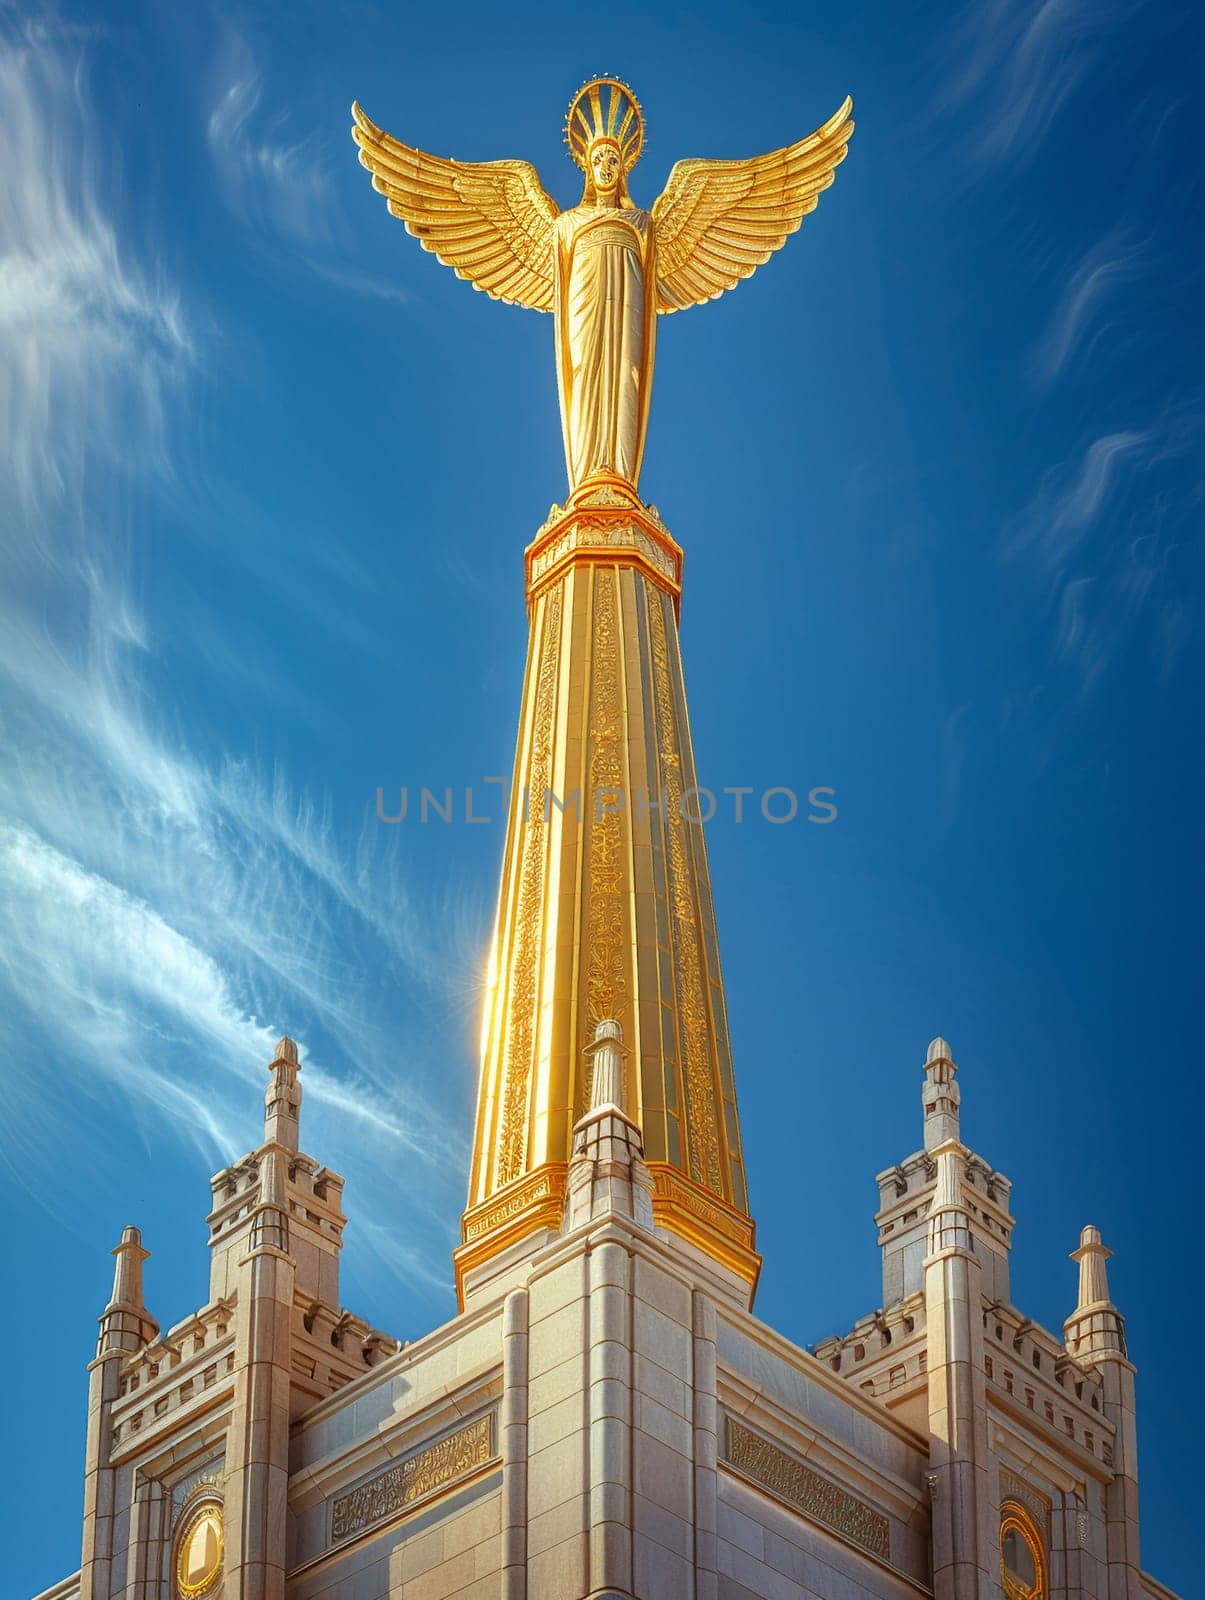 Mormon Angel Moroni Statue Trumpeting atop a Temple, The figure blends with the sky, a herald of faith and the Latter-Day Saints.